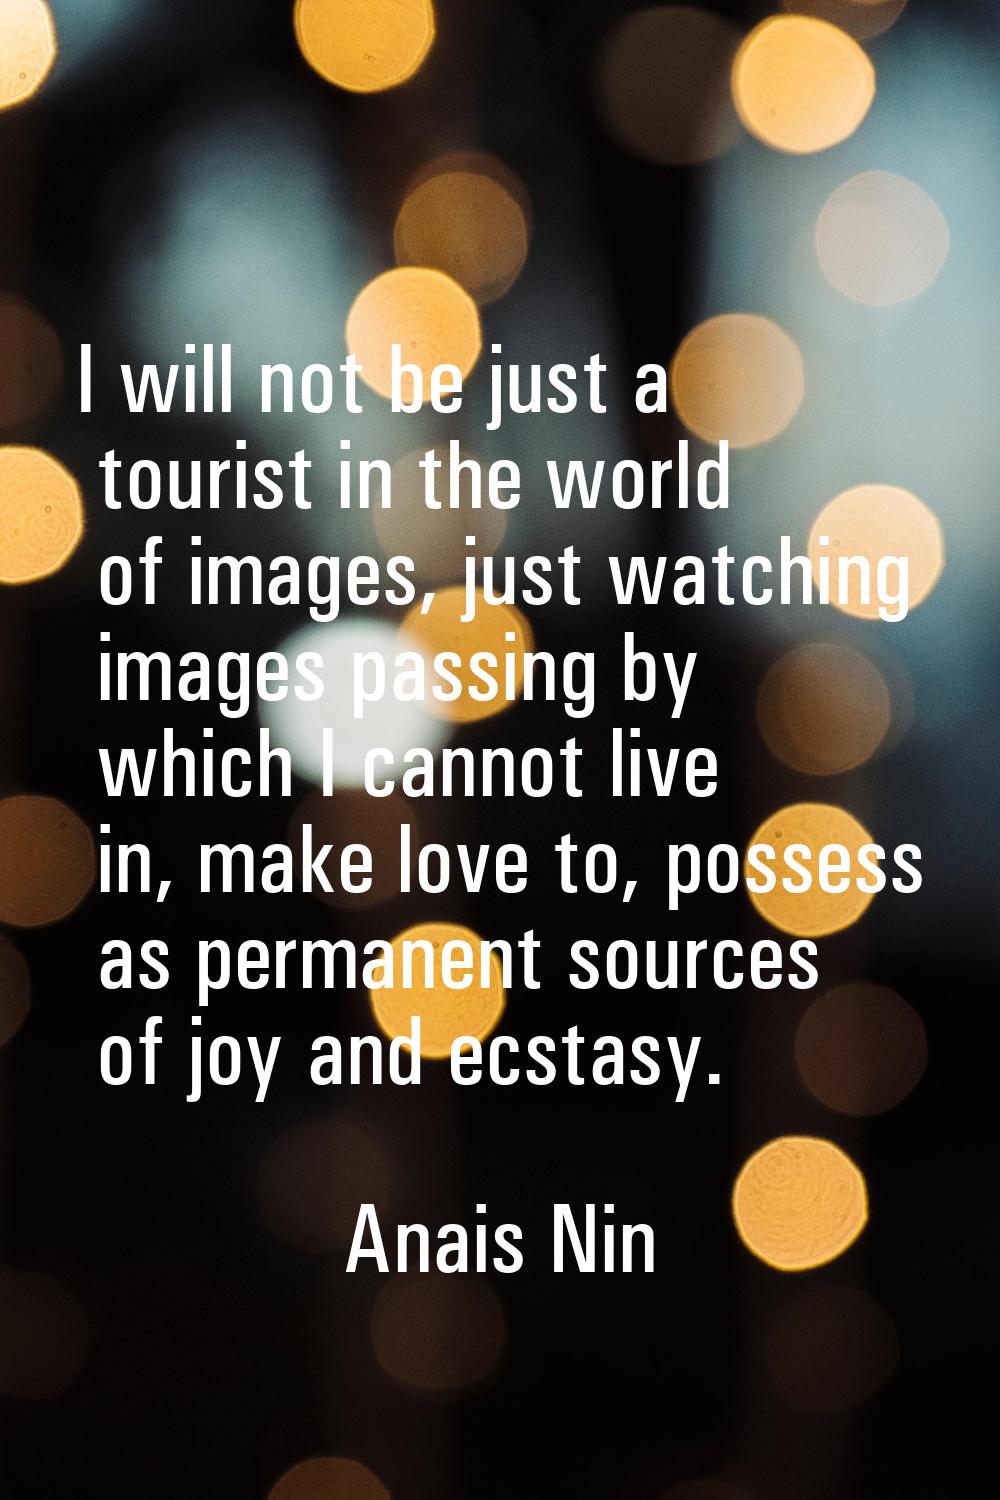 I will not be just a tourist in the world of images, just watching images passing by which I cannot